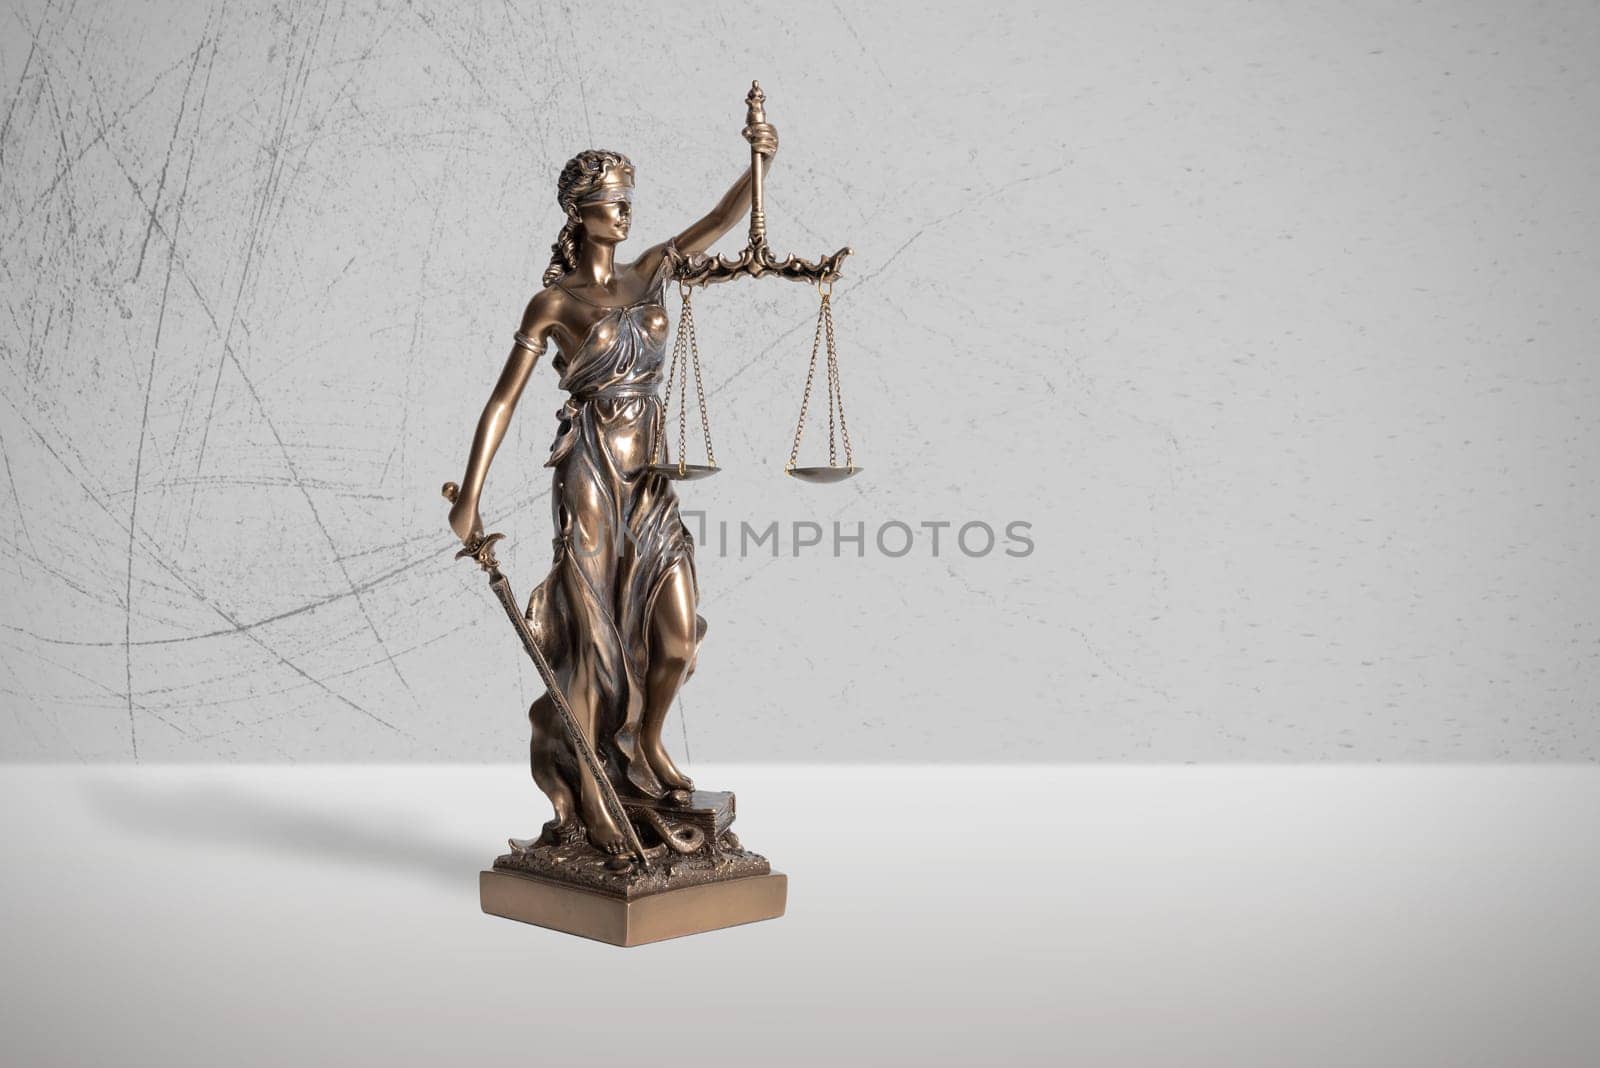 The Statue of Justice, lady justice or Iustitia by simpson33